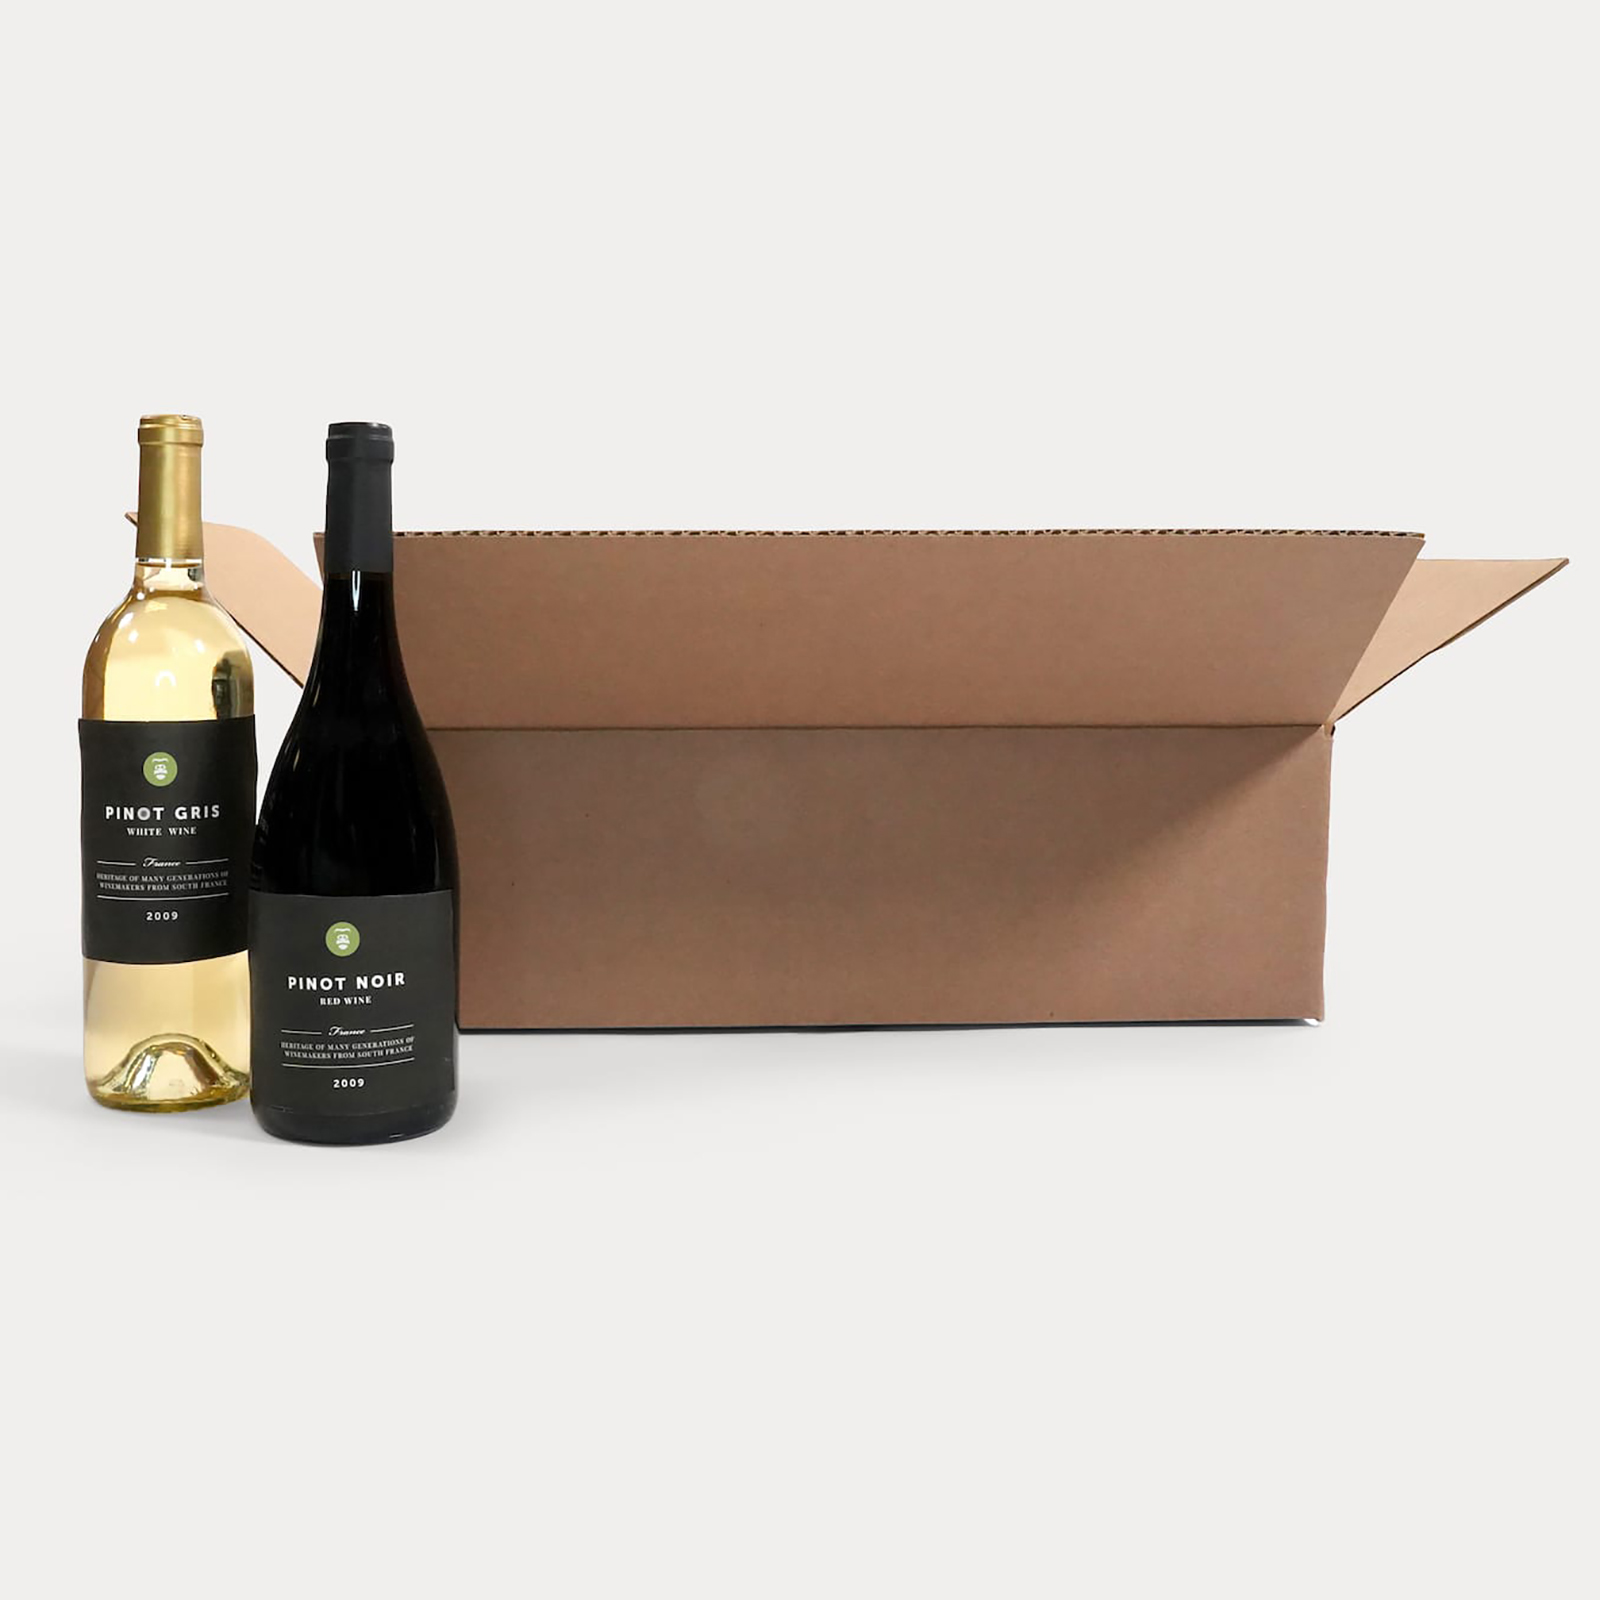 FedEx/UPS/ISTA Certified Triple Pack Sustainable Universal Wine Bottle Shipping Box Packaging